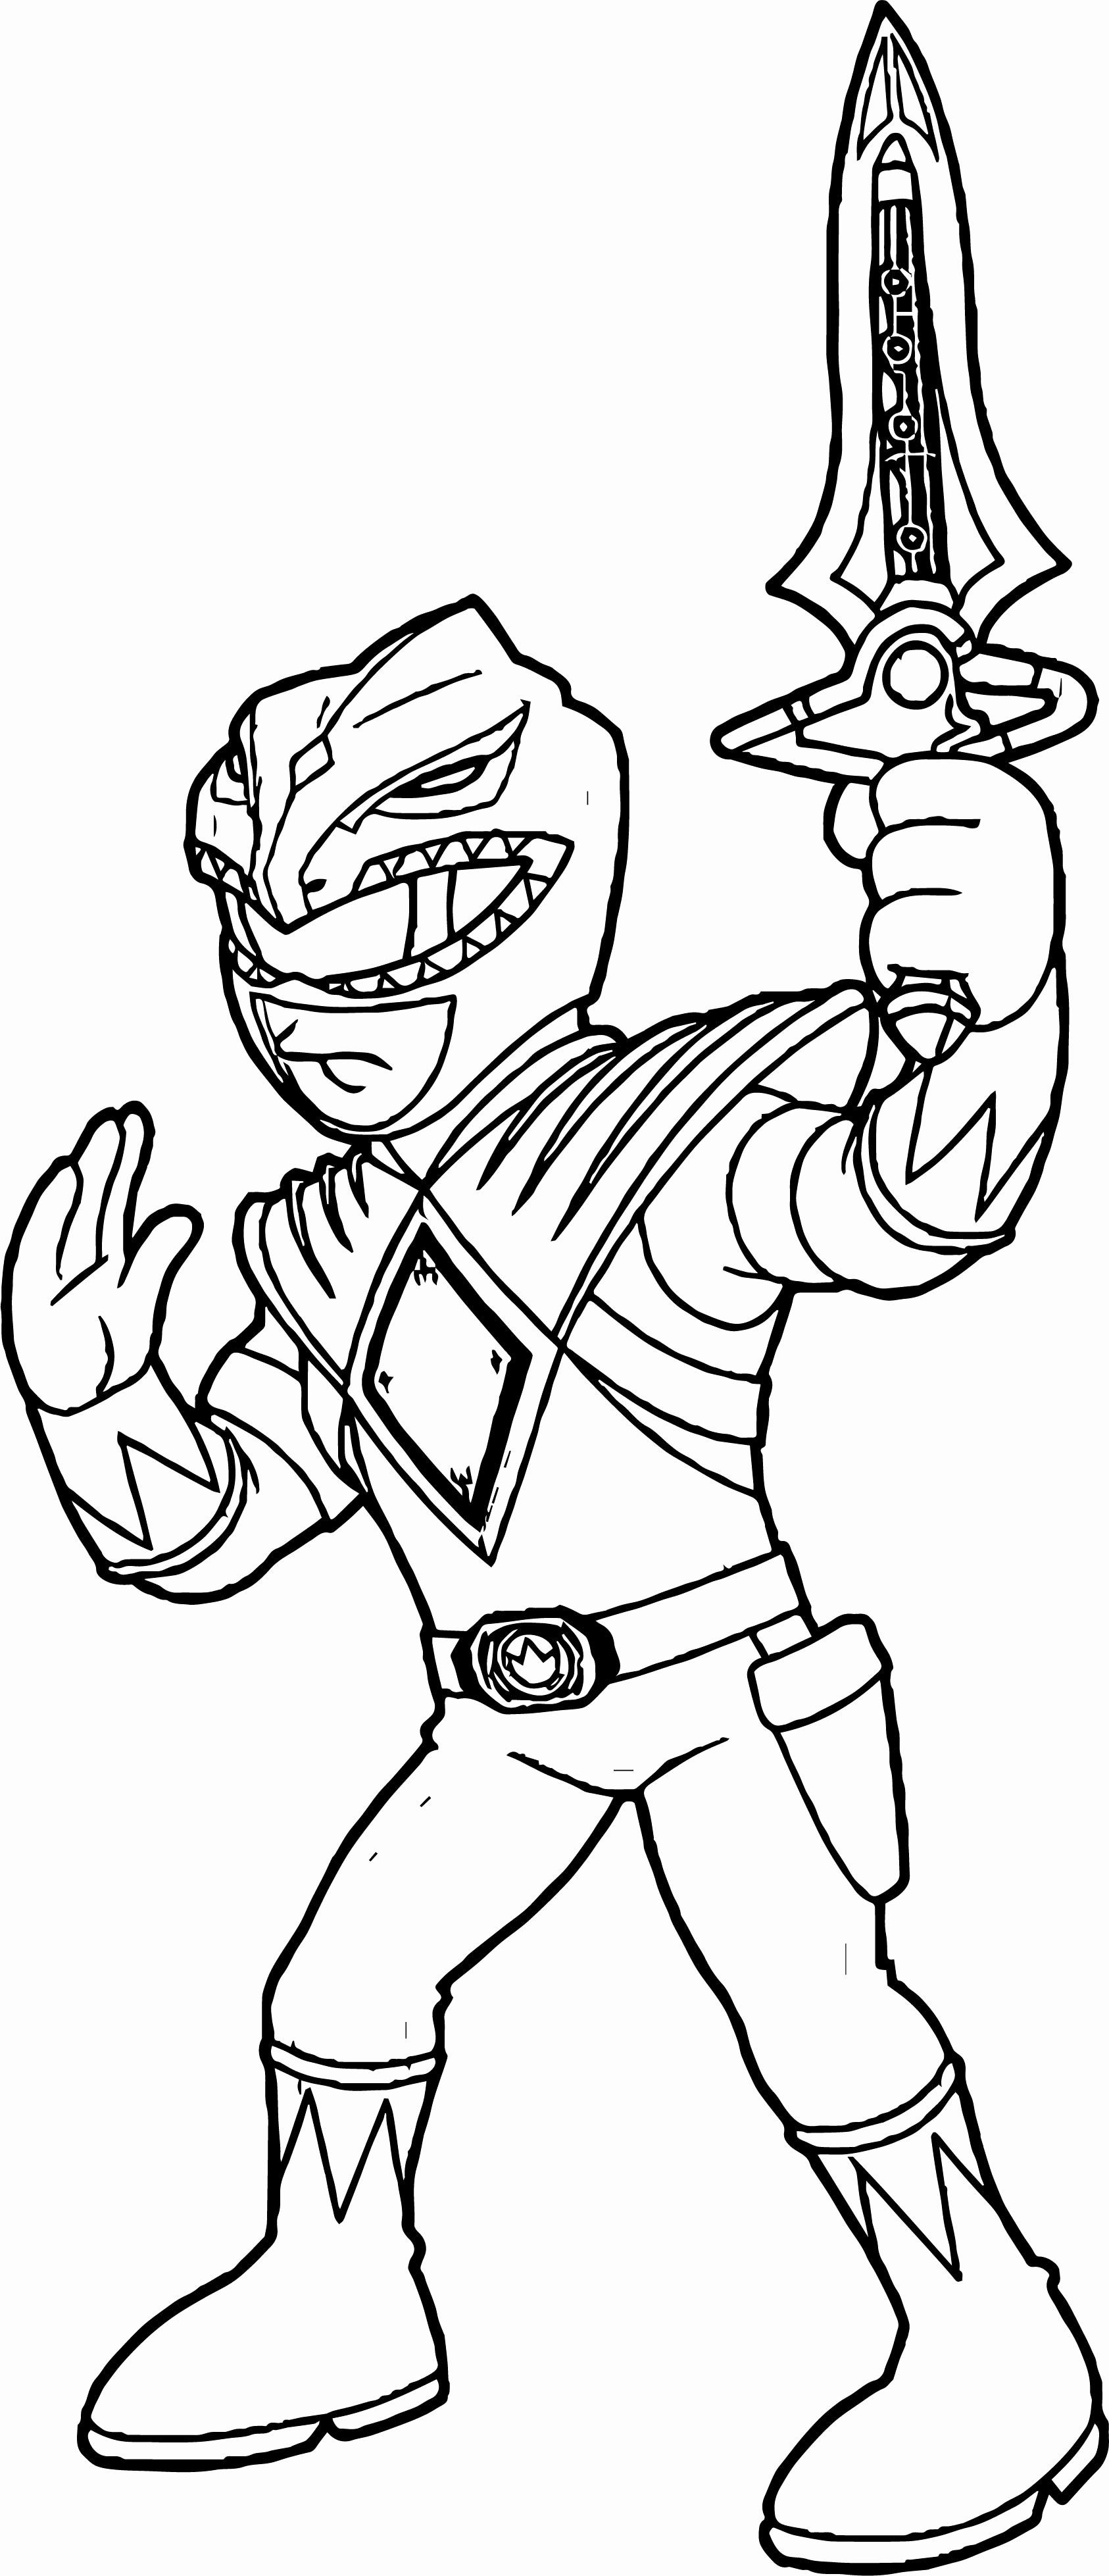 power-ranger-coloring-page-awesome-power-rangers-green-ranger-coloring-page-power-rangers